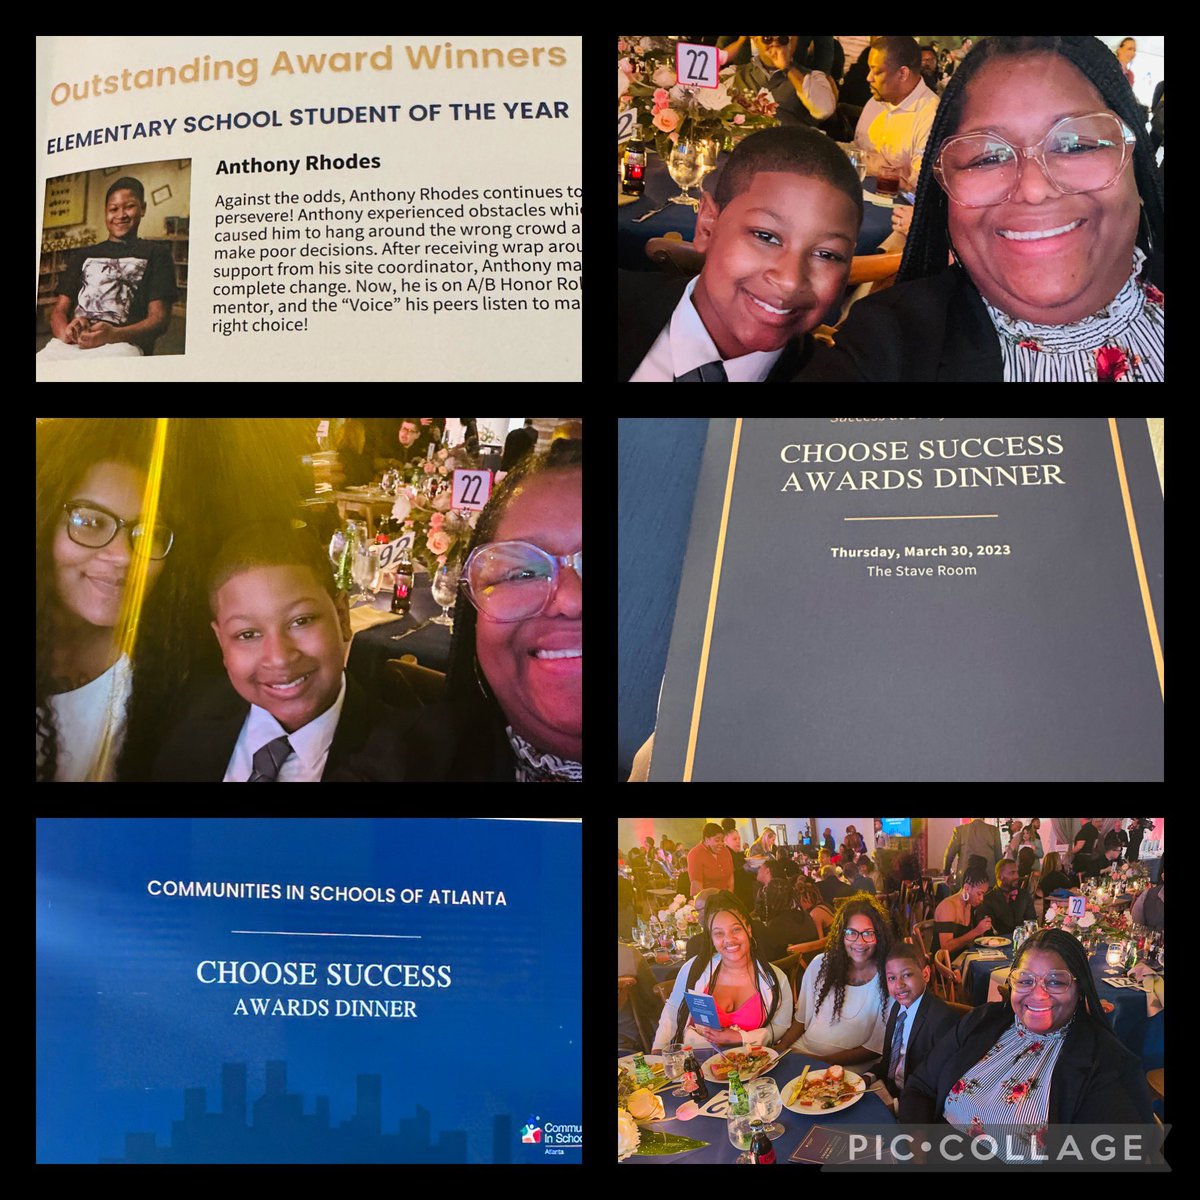 There are not enough words to express how proud I am of @ConleyHillsCubs' scholar who is being honored as @cisatlanta' Elementary School Student of the Year 👏🏾👏🏾👏🏾. Thank you, @TanaziaCIS for creating opportunities for our scholars ♥️. #ChooseSuccess23 #SuccessIsOurOnlyOption🎯